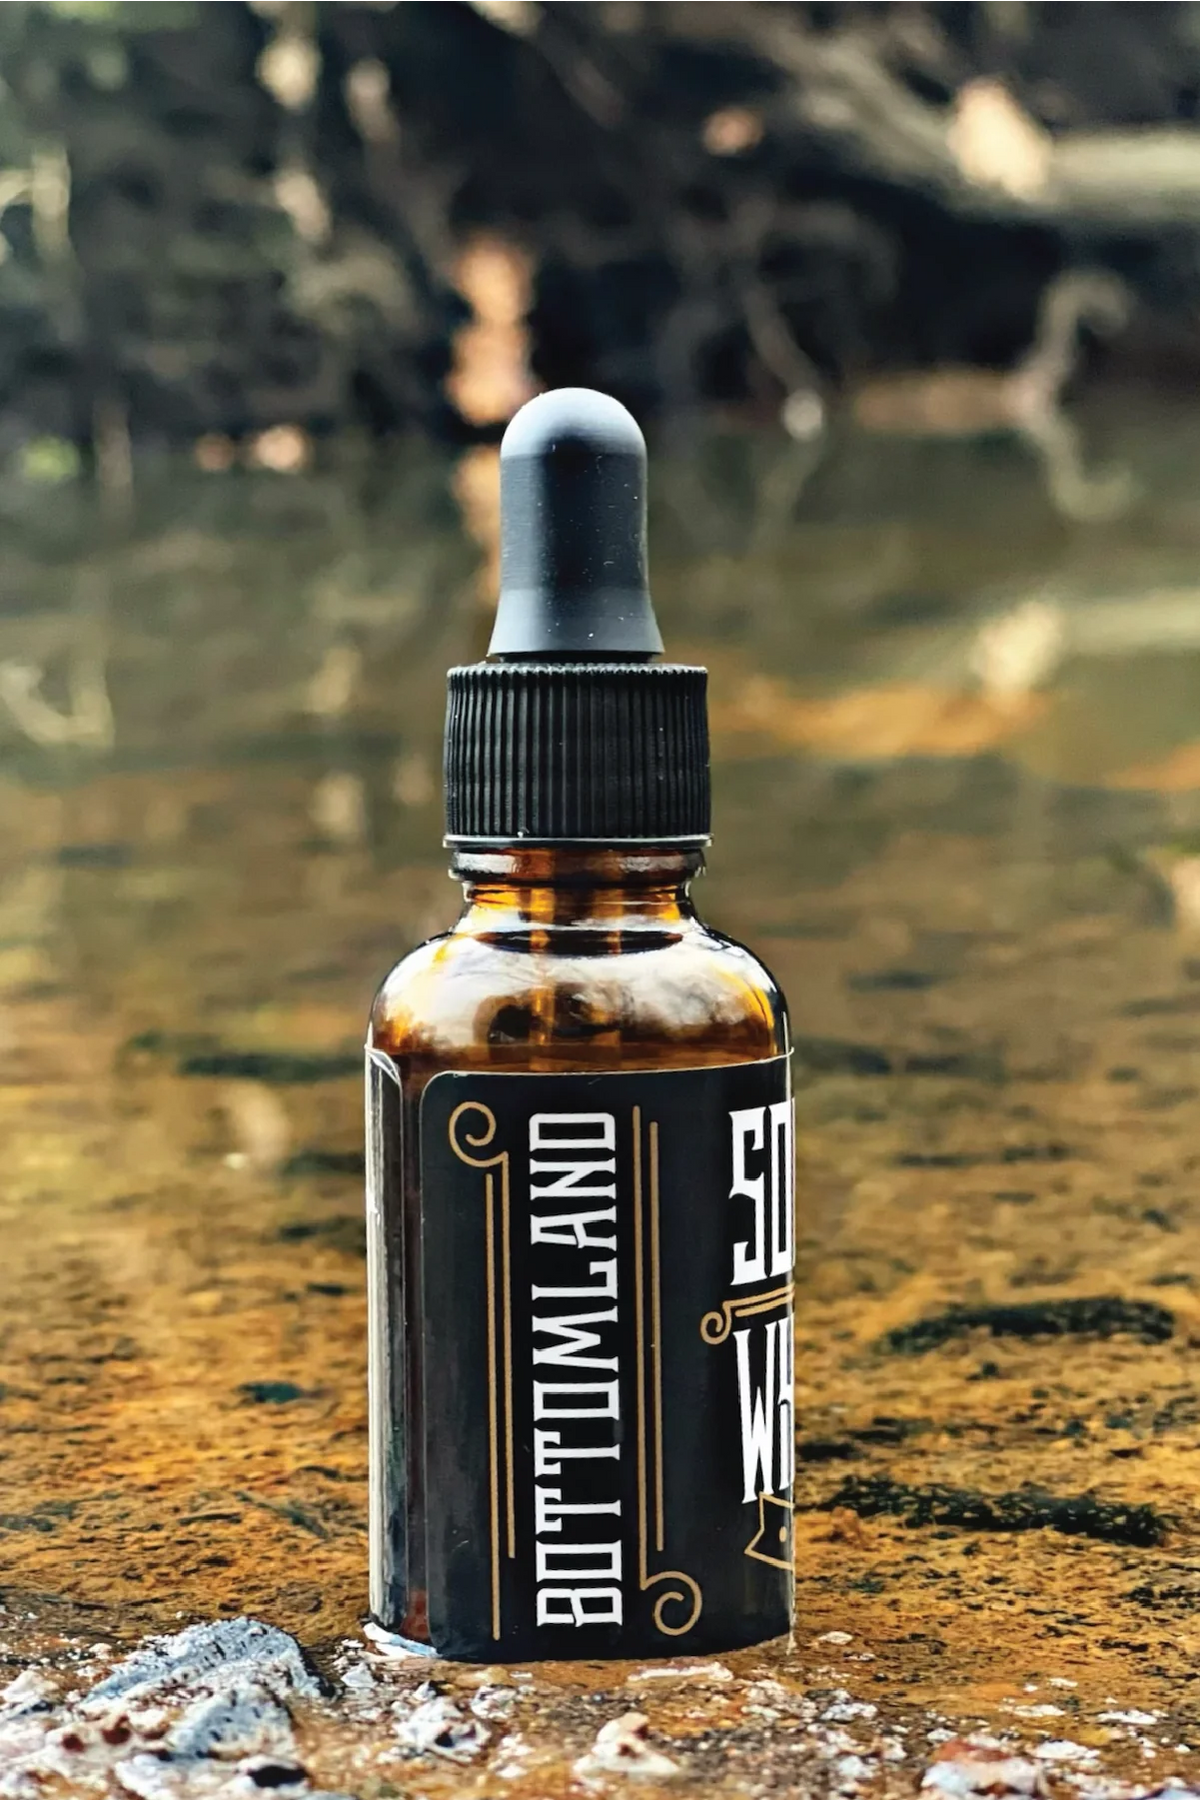 Southern Whiskers Beard Oil